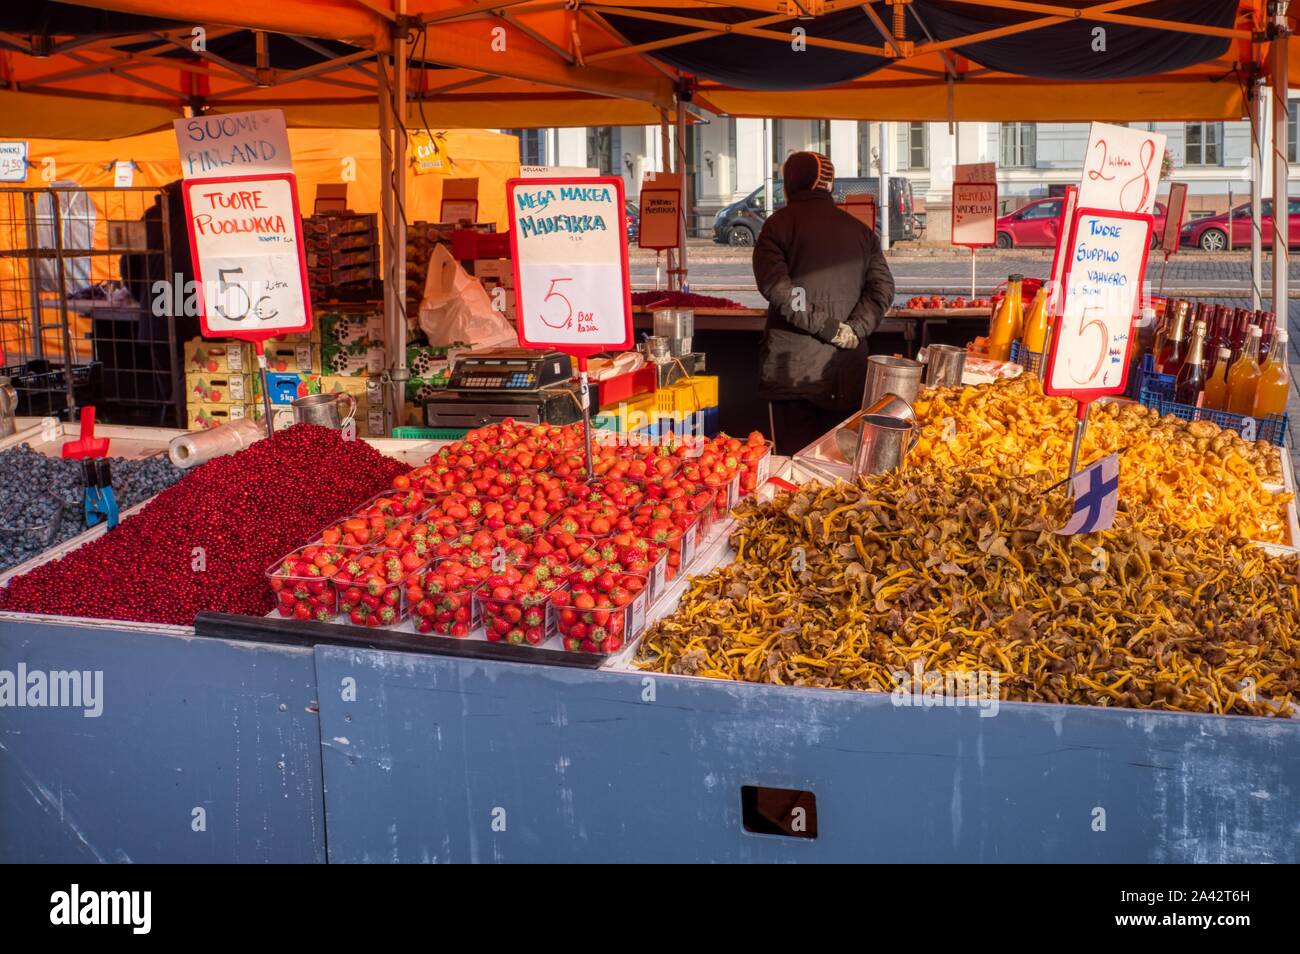 Fresh food. Lingonberries, strawberries and chanterelle mushrooms piled up on a market stall, Central Market, Helsinki, Finland Stock Photo